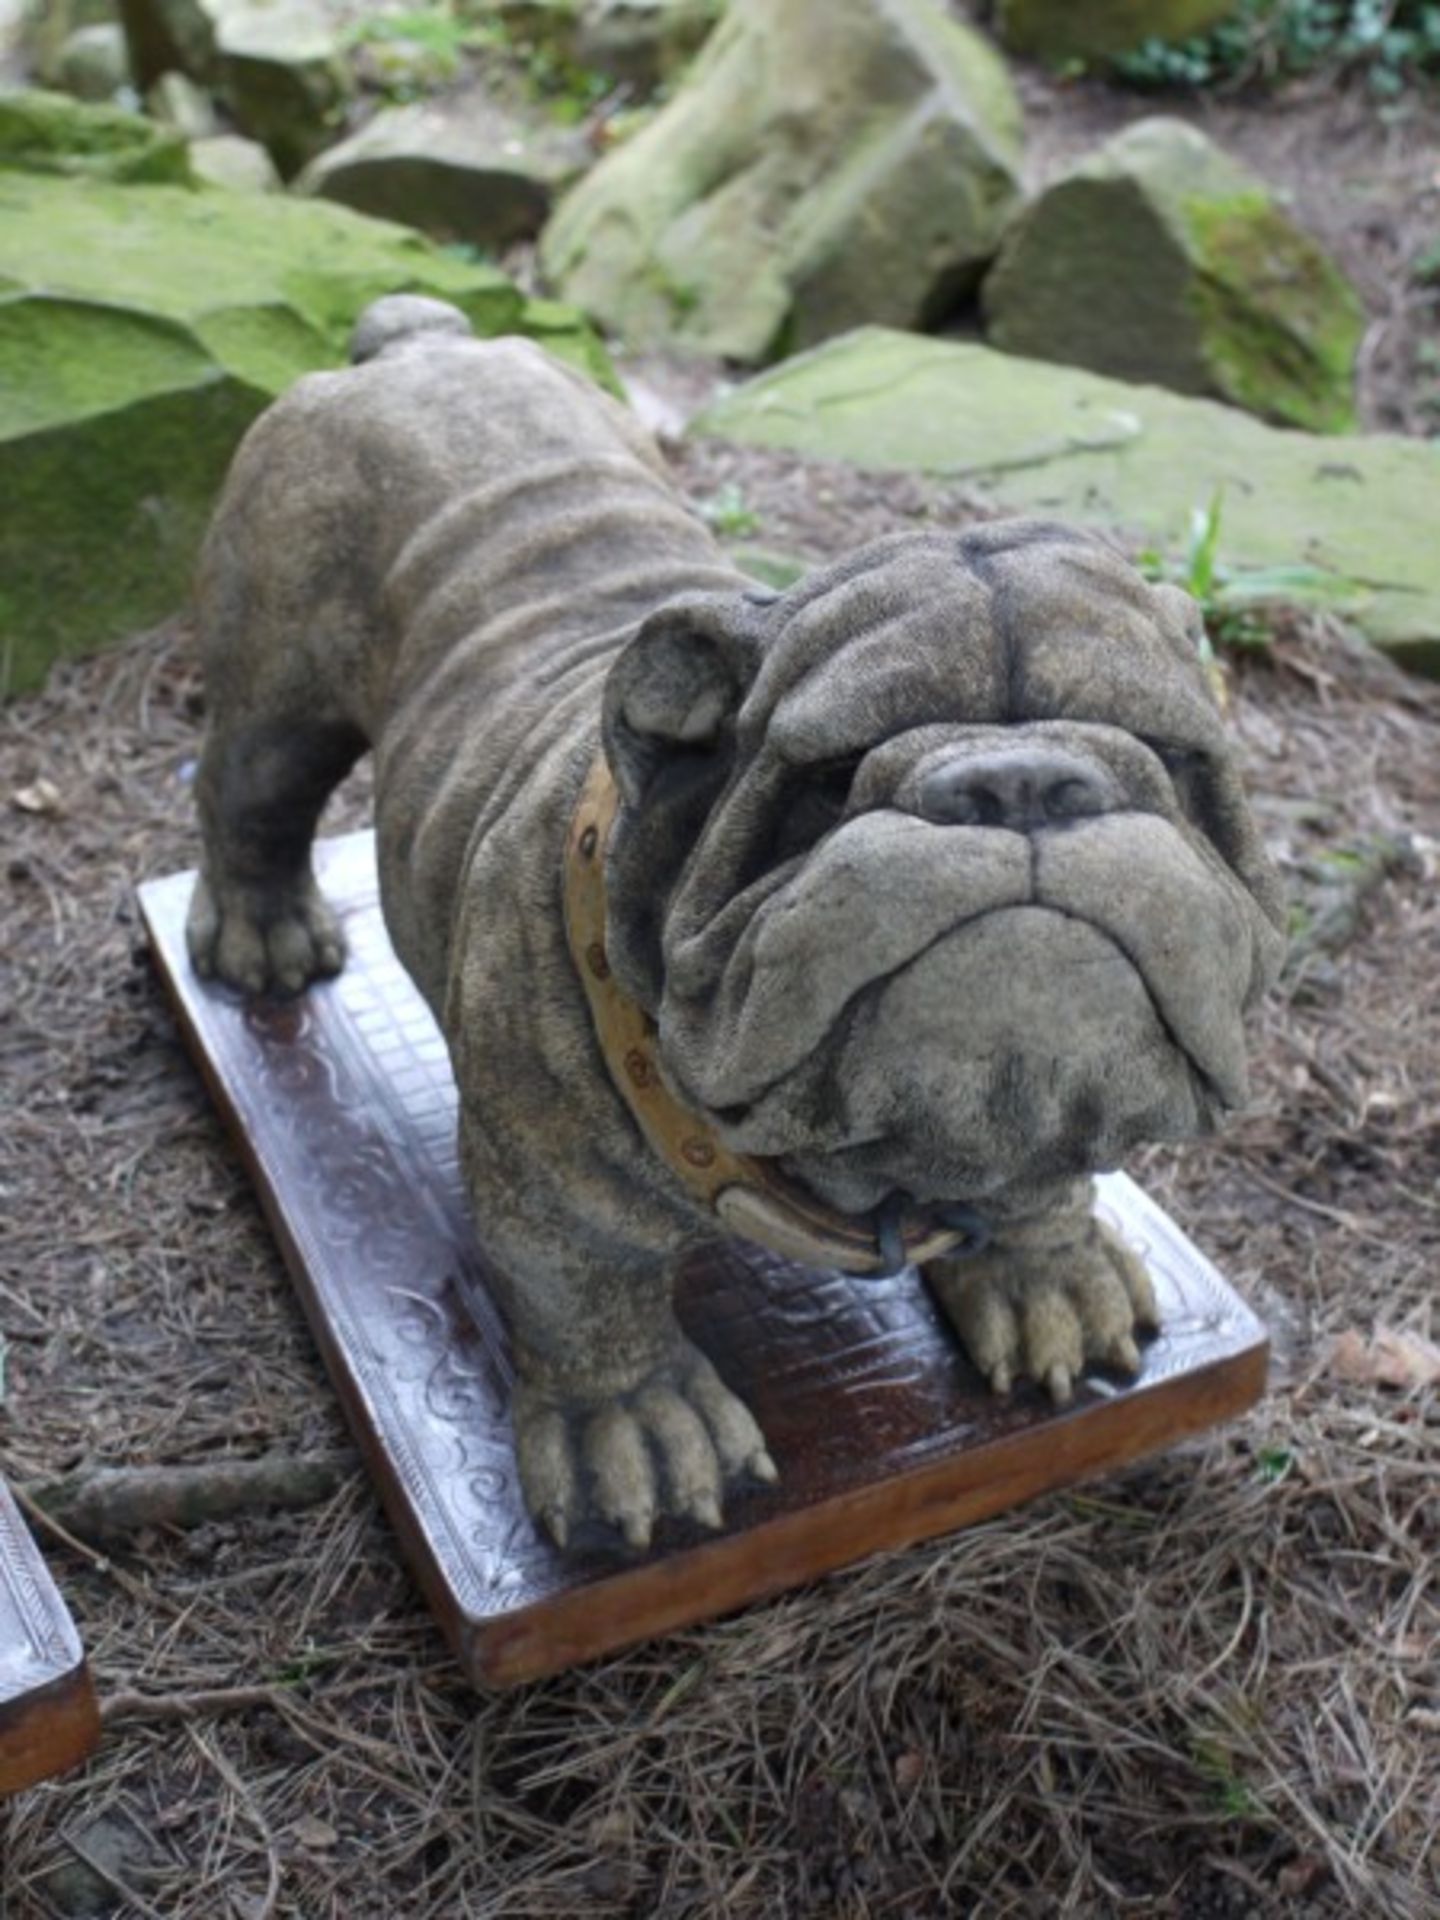 PAIR OF BULLDOGS   DIMENSIONS: Length: 65 cm Width: 33 cm Height: 40 cm   COLLECTION / VIEWING - Image 3 of 6